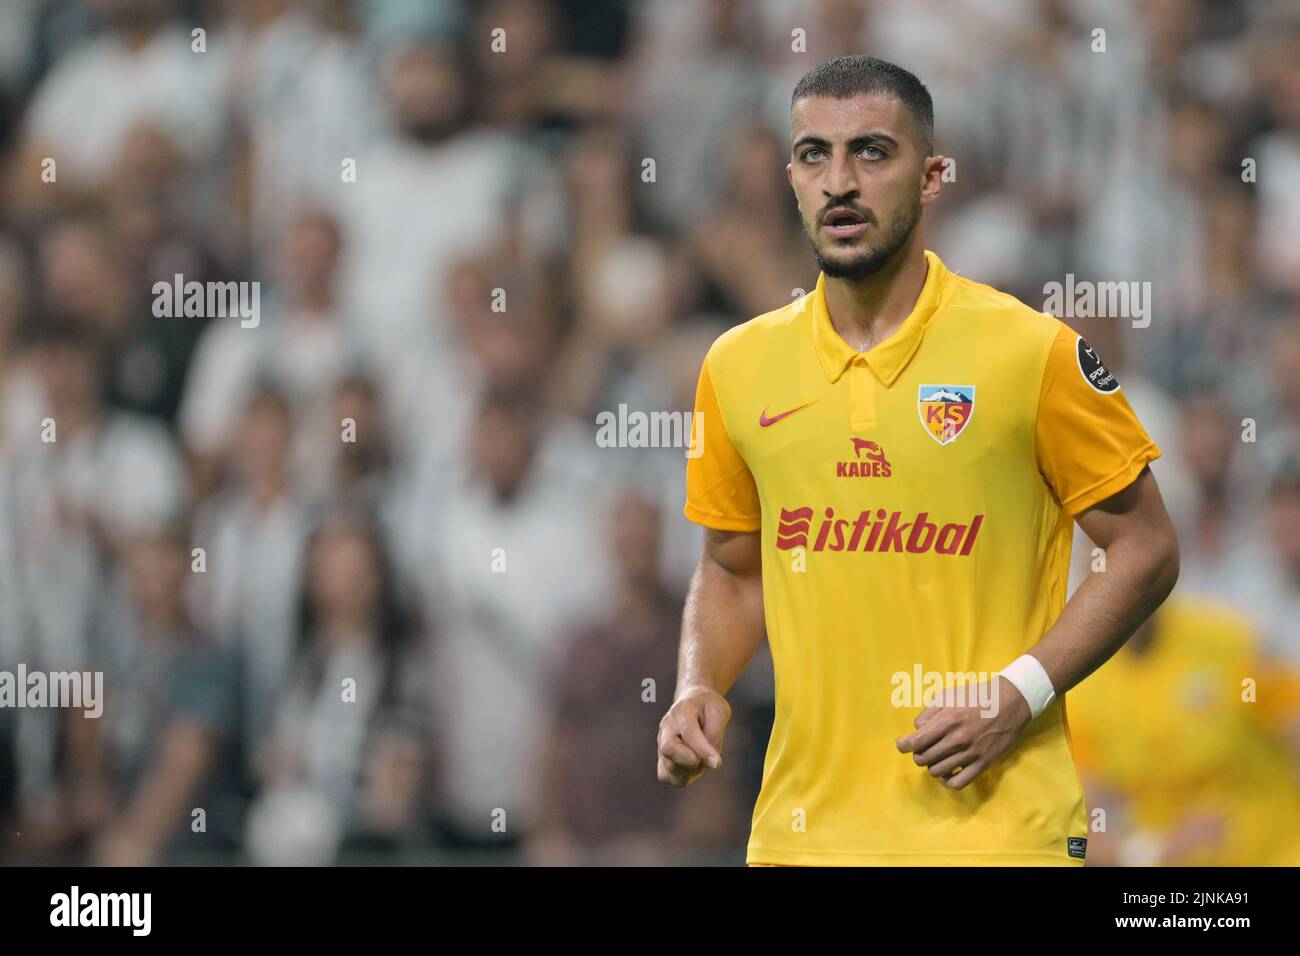 ISTANBUL - Majid Hosseini of Kayserispor during the Turkish Super Lig match between Besiktas AS and Yukatel Kayserispor at the Vodafone Park Arena on August 6, 2022 in Istanbul, Turkey. ANP | Dutch Height | GERRIT FROM COLOGNE Stock Photo